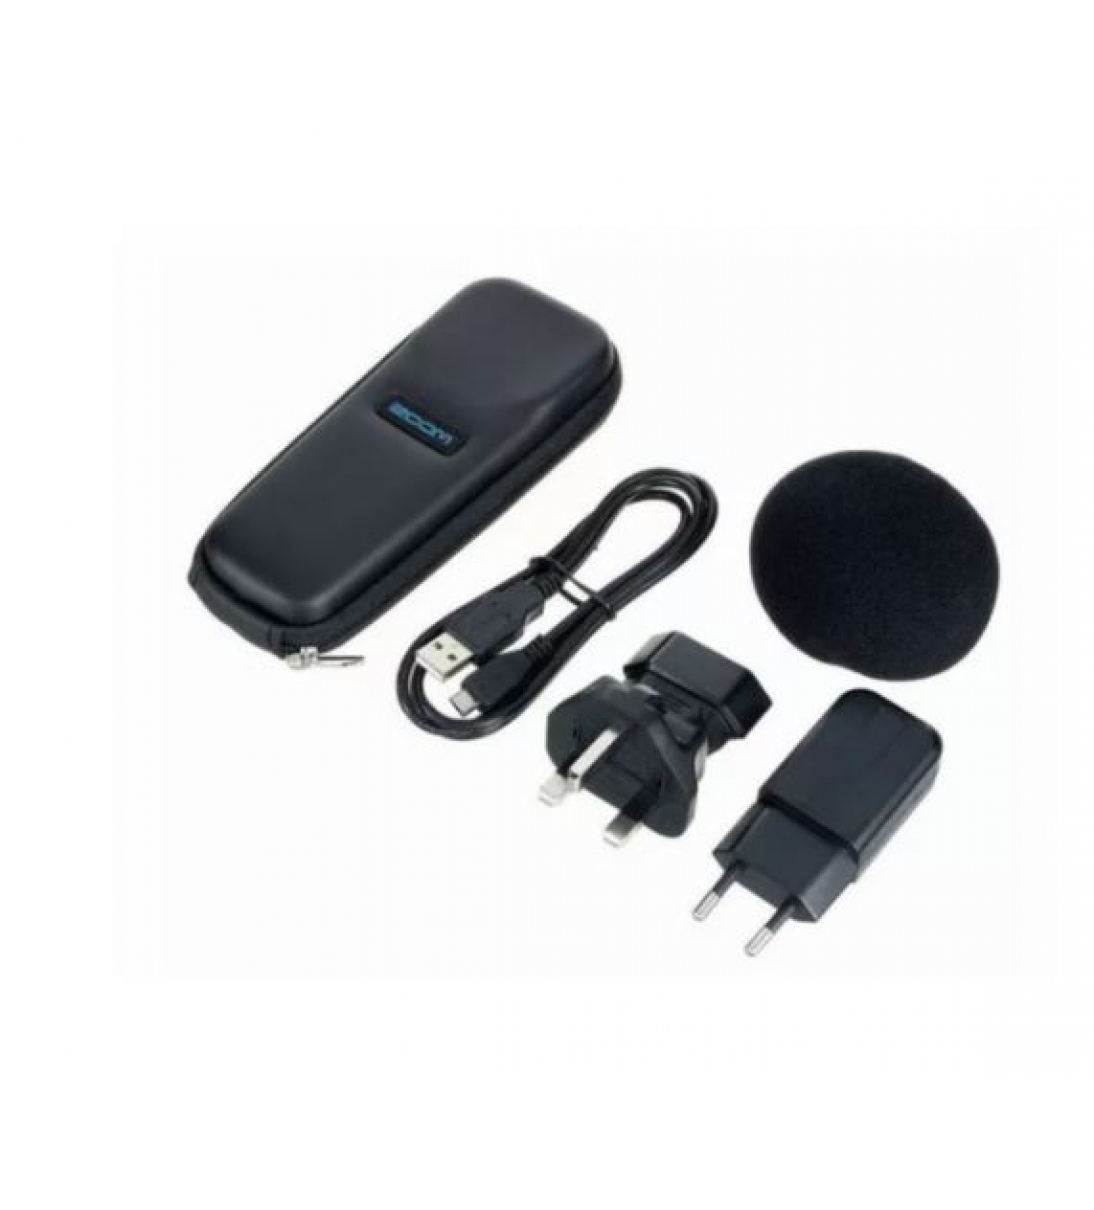 SPH-1n Handy Recorder Accessory Pack